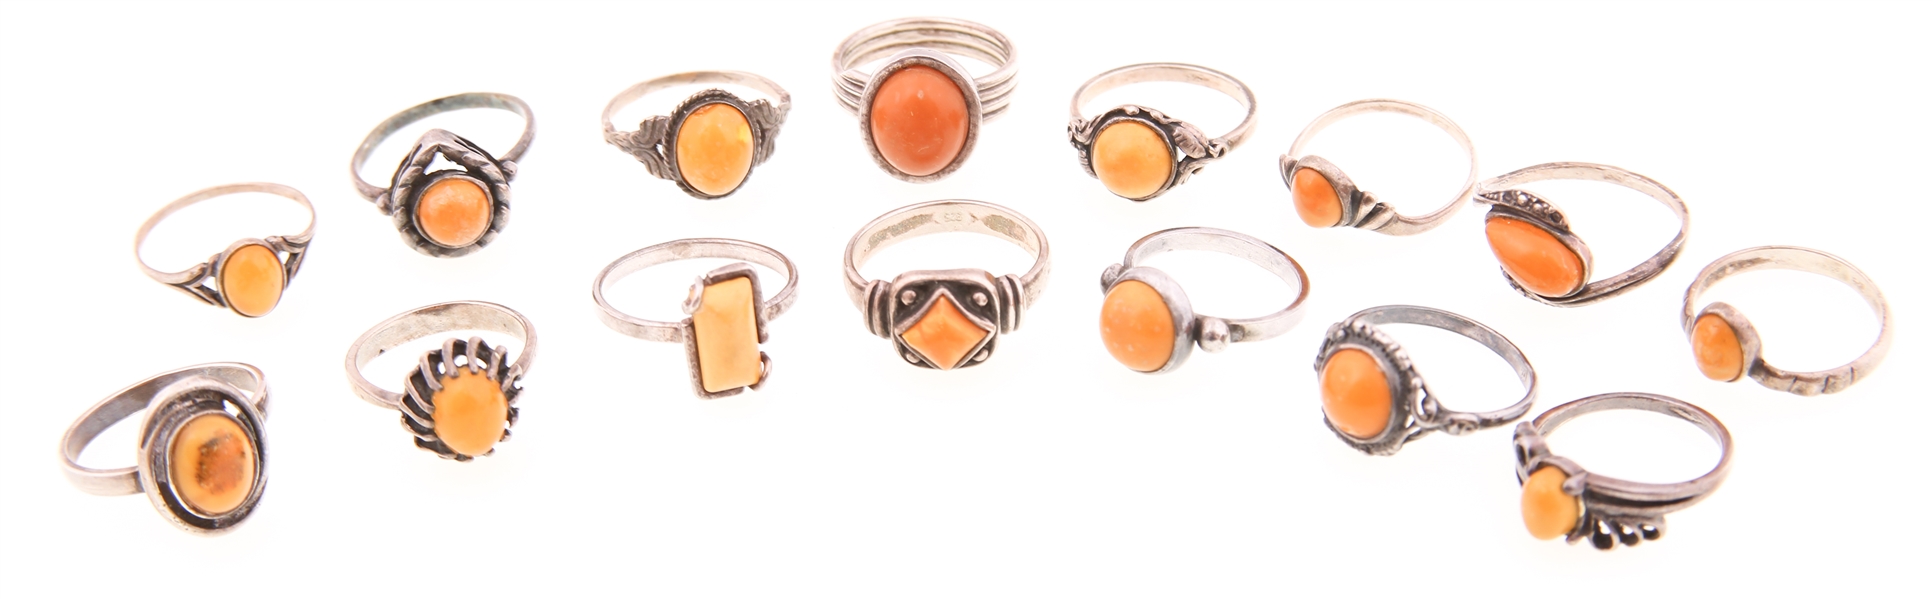 STERLING SILVER BUTTERSCOTCH AMBER RINGS - LOT OF 15